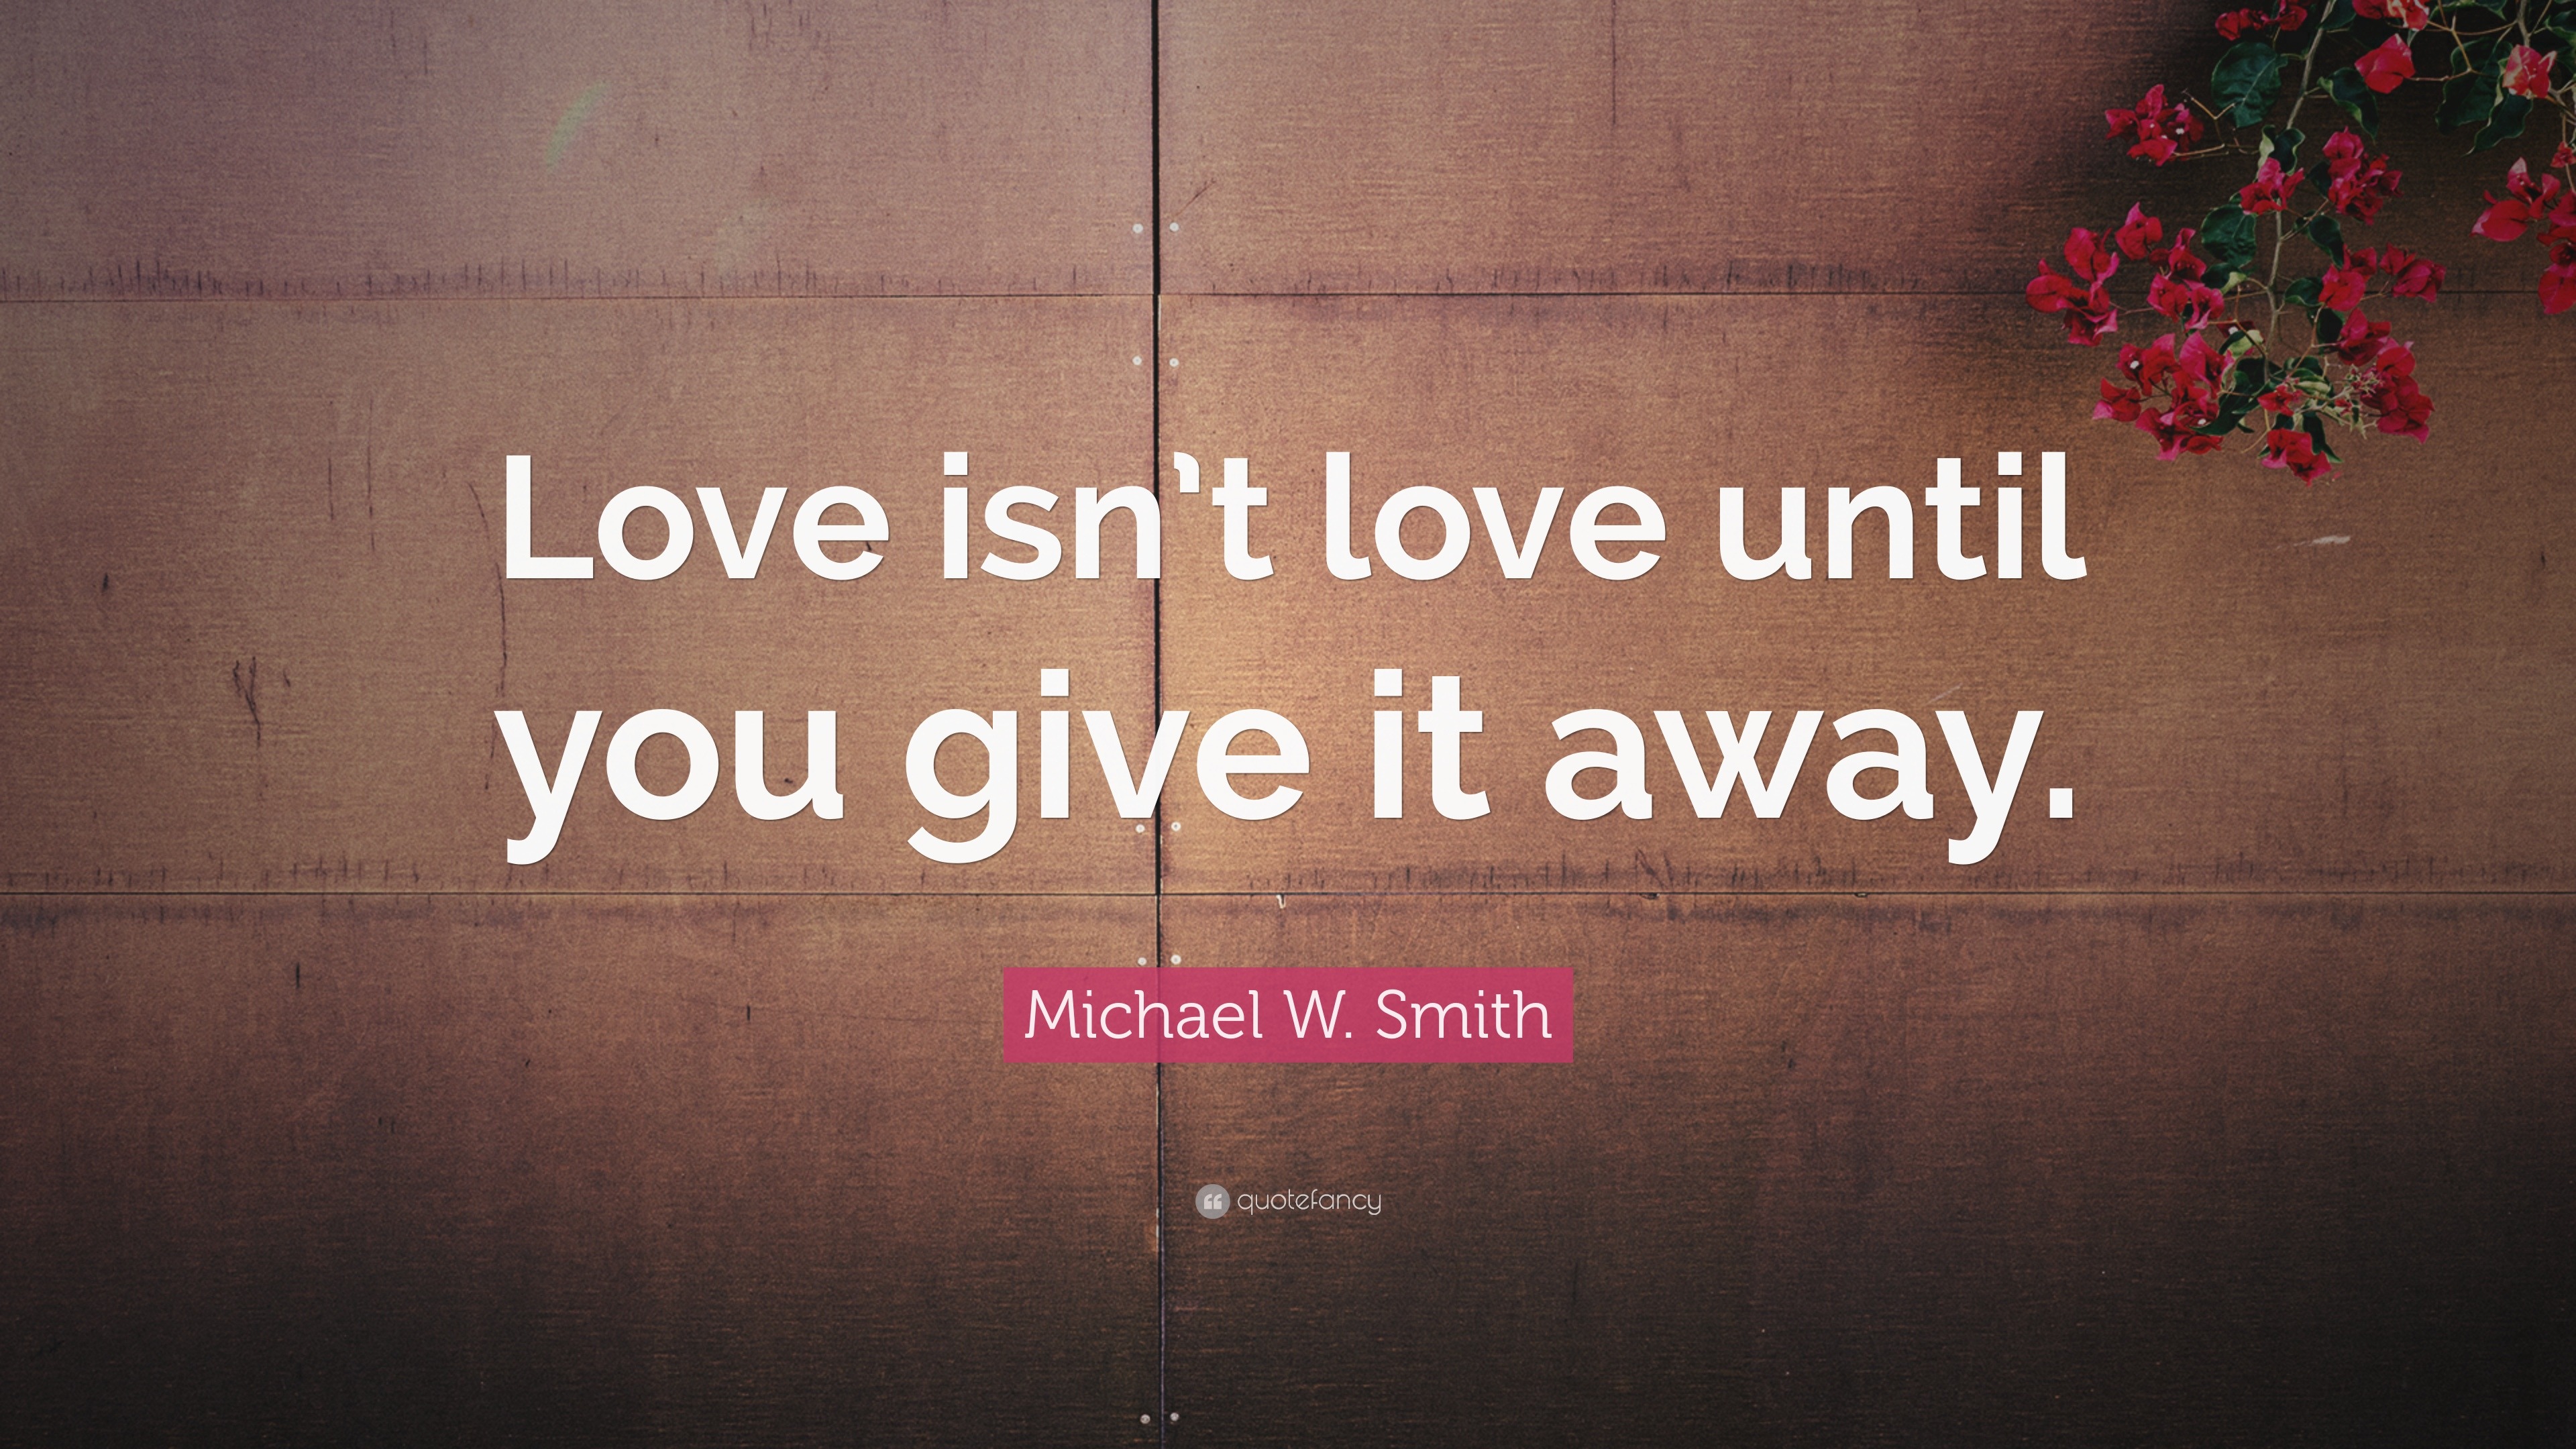 Michael W Smith Quote “Love isn t love until you give it